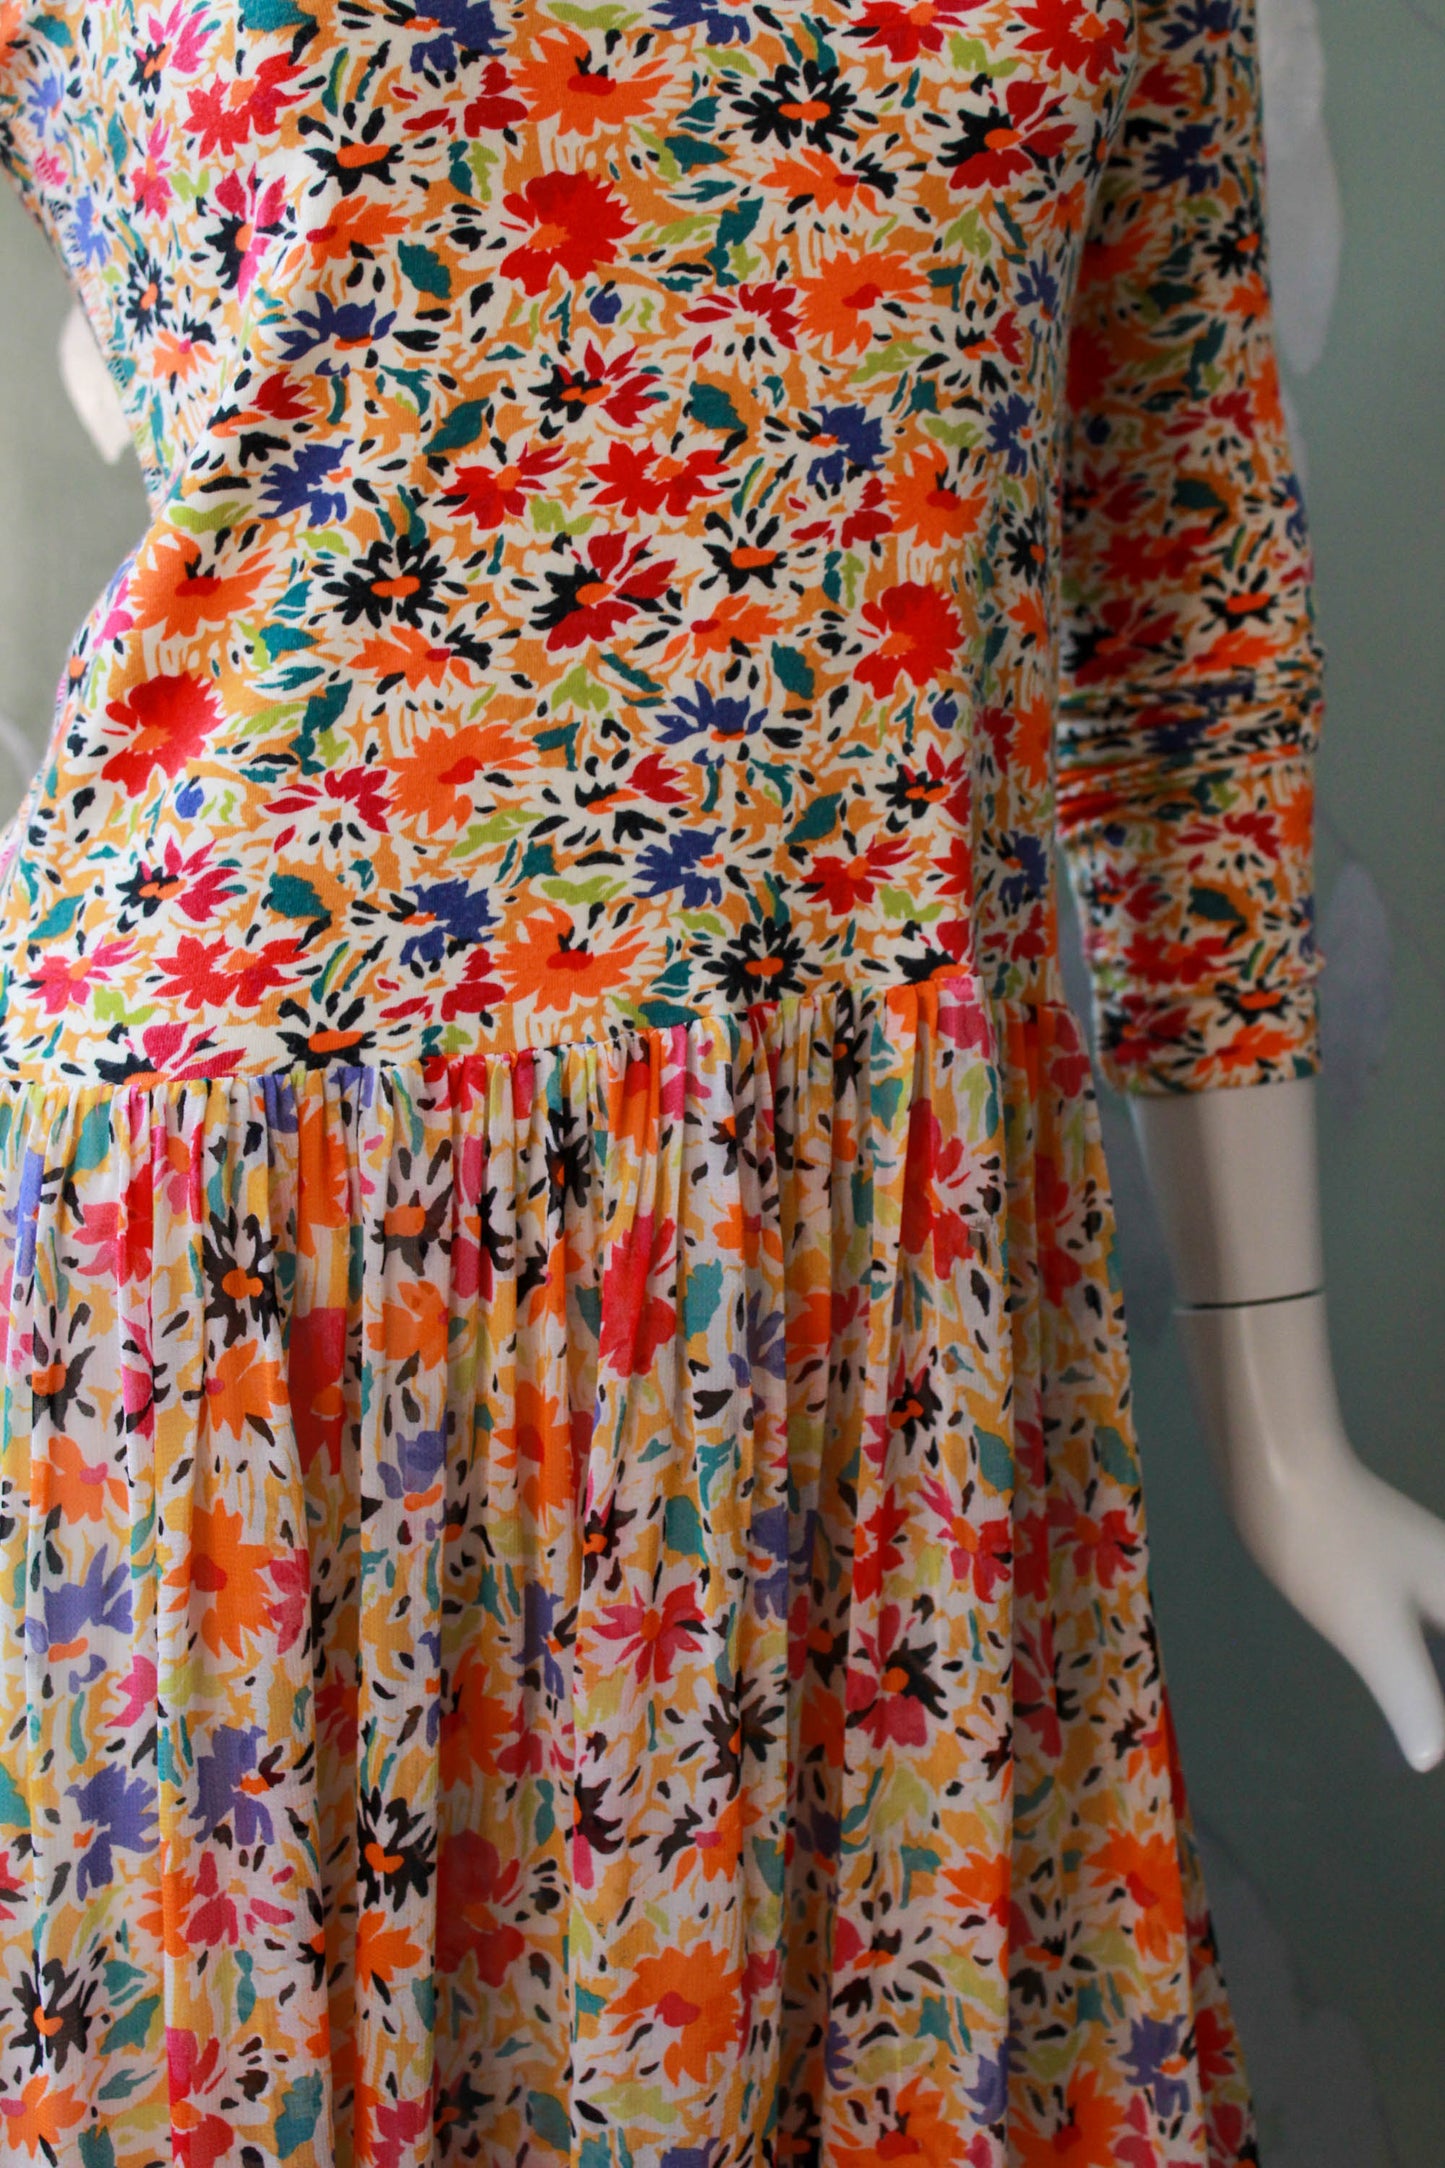 80s vintage Sonia Rykiel Floral Print Maxi Dress, Sheer Skirt and Knit Longsleeve top with scoop neckline